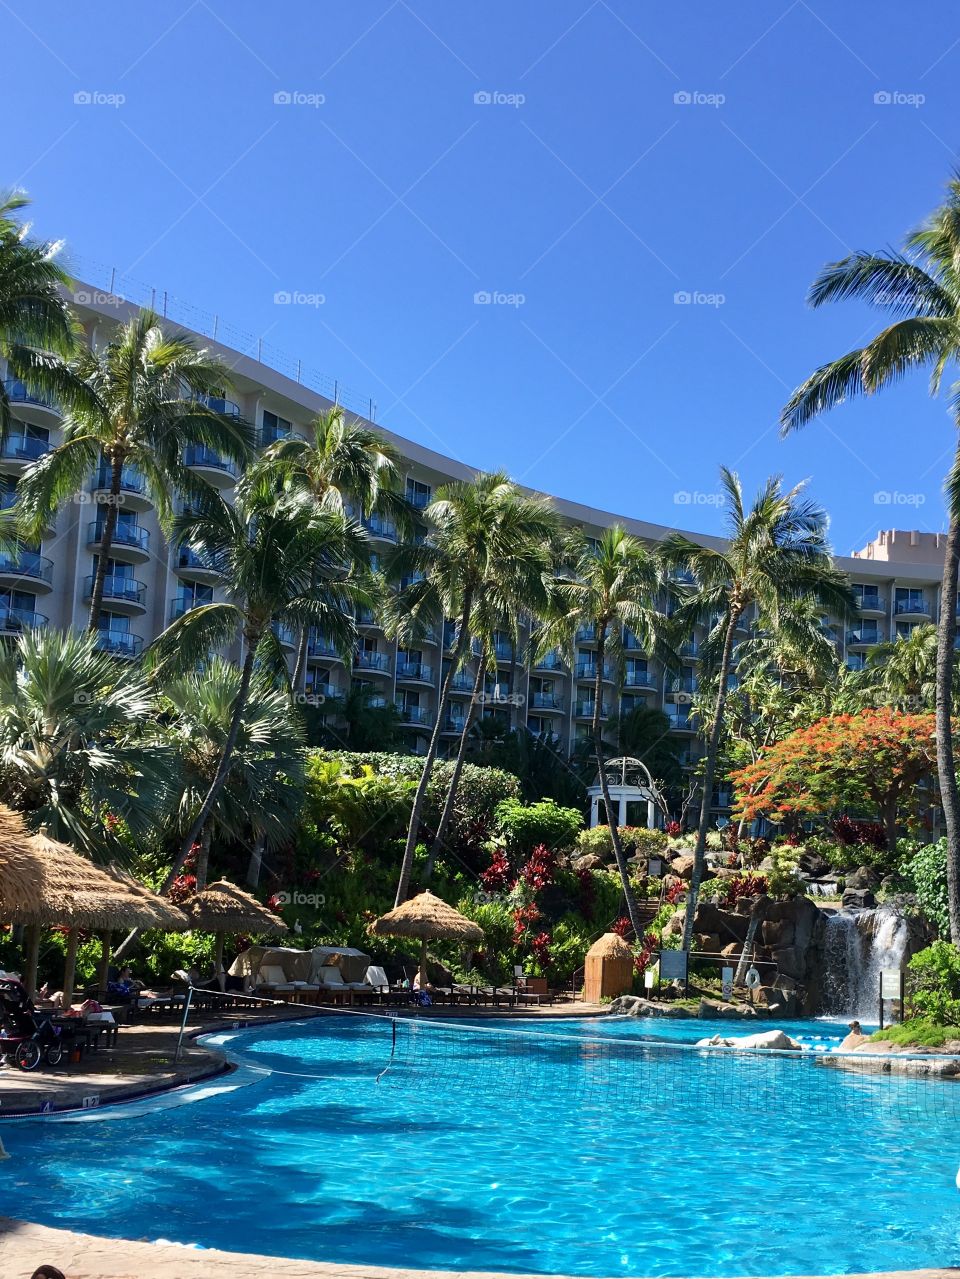 An inviting, tranquil, peaceful, colorful, tropical hotel pool at the Westin hotel in Maui, Hawaii. 